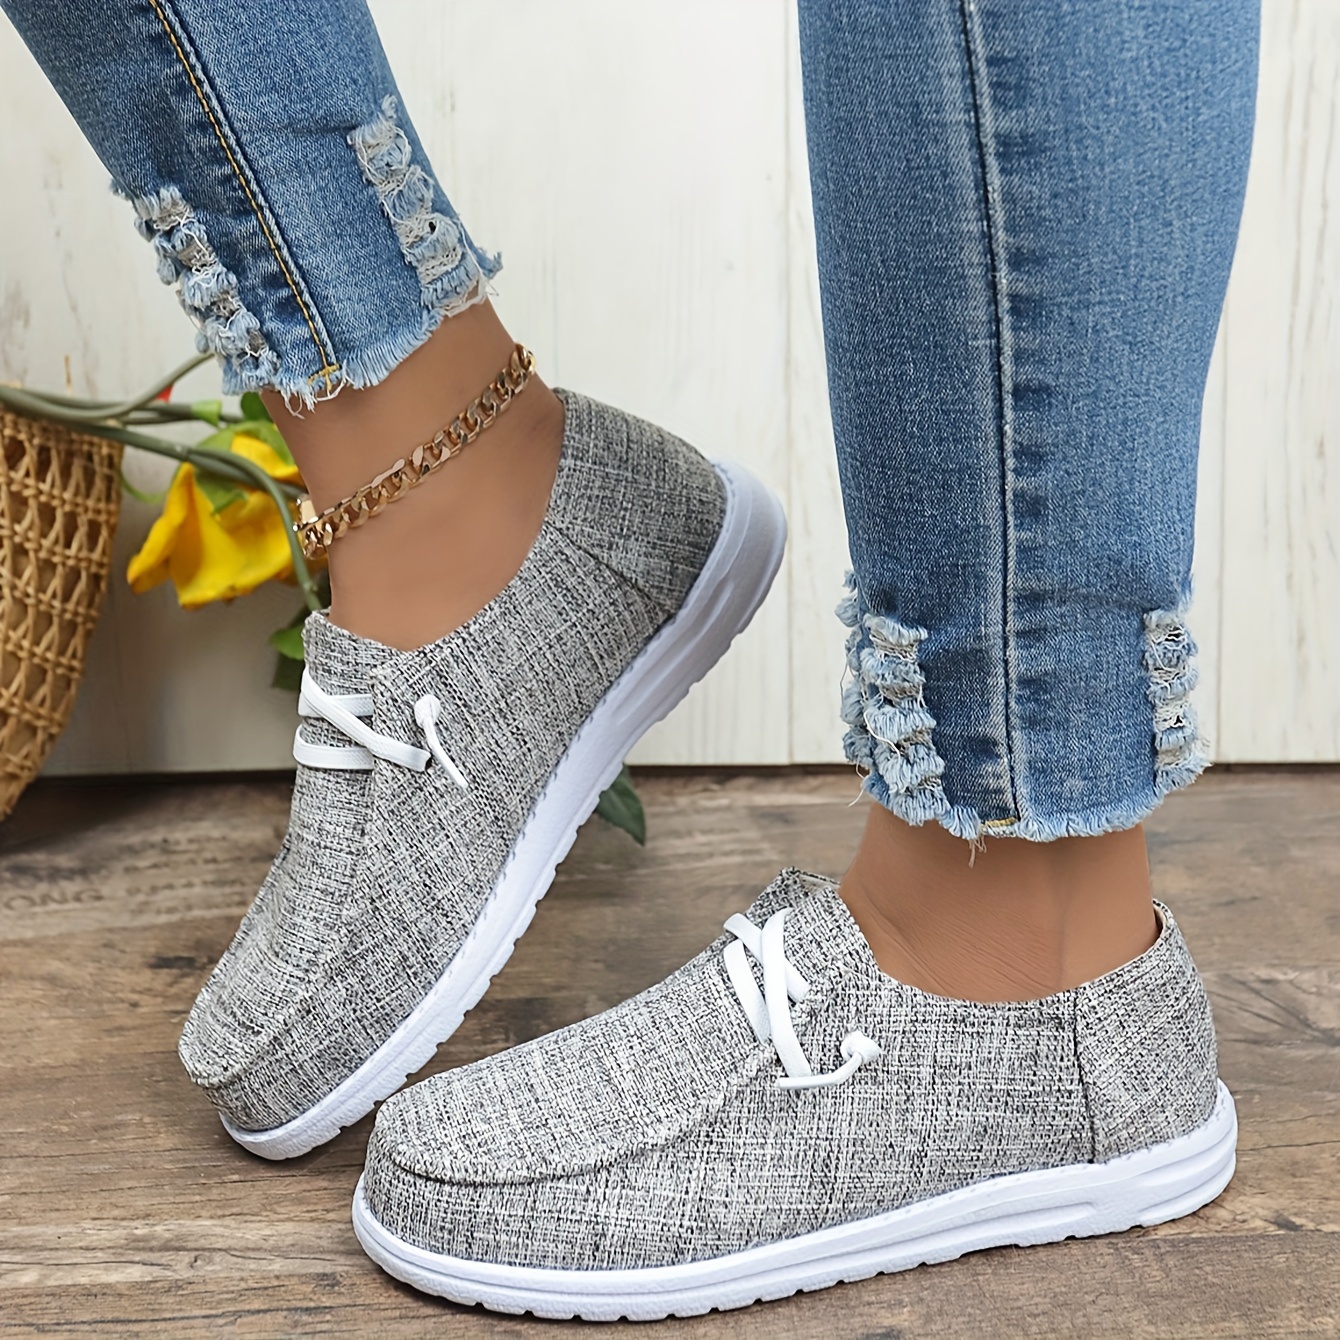 

Women's Fashion Skateboard Shoes, With Solid Color Upper, Flat Light Lace-up Canvas Shoes